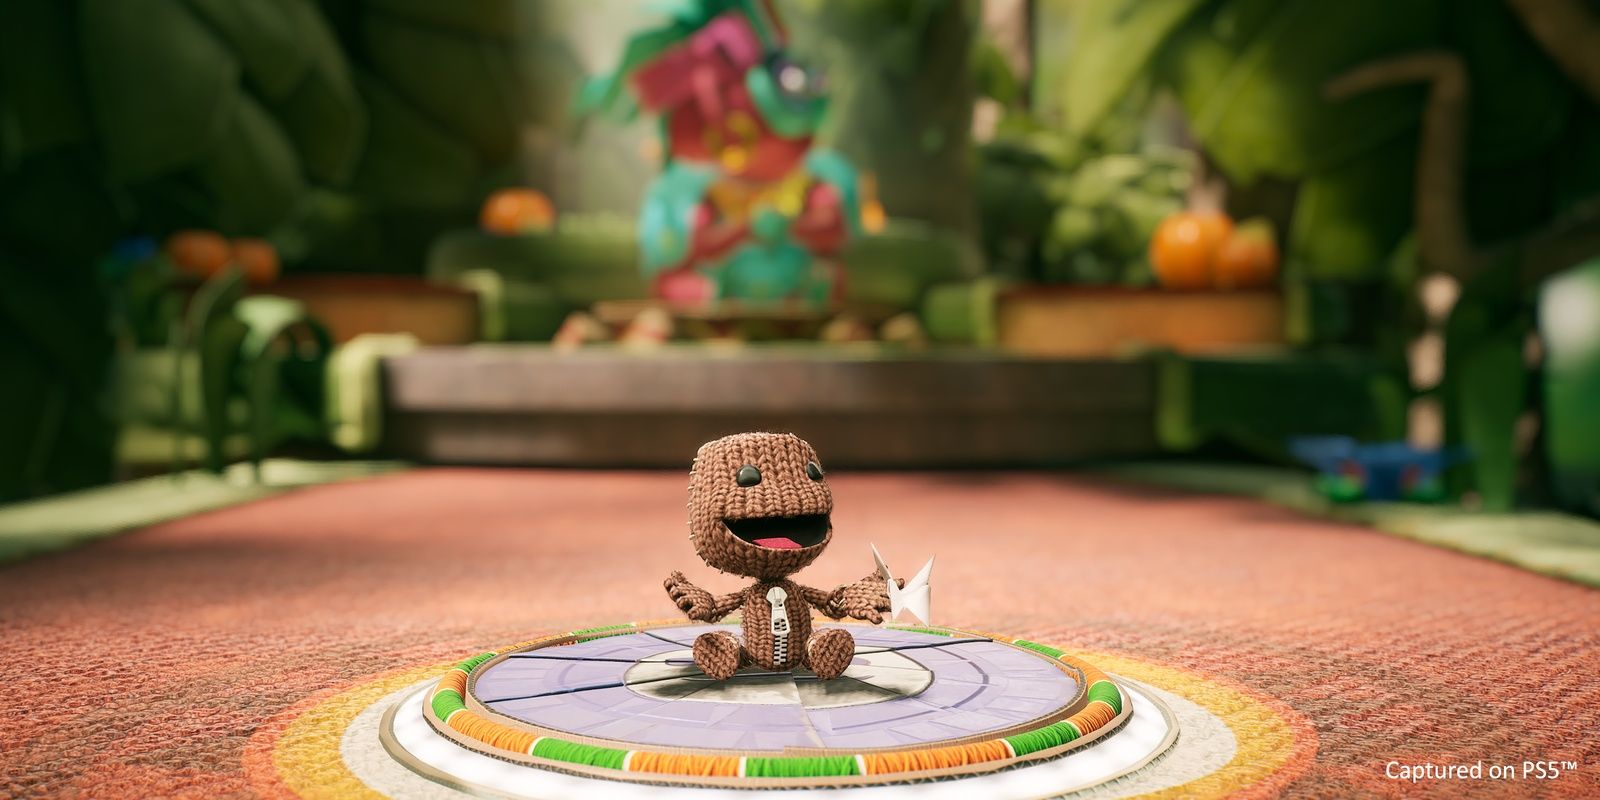 10 Major Differences Between The PS4 & PS5 Versions Of Sackboy: A